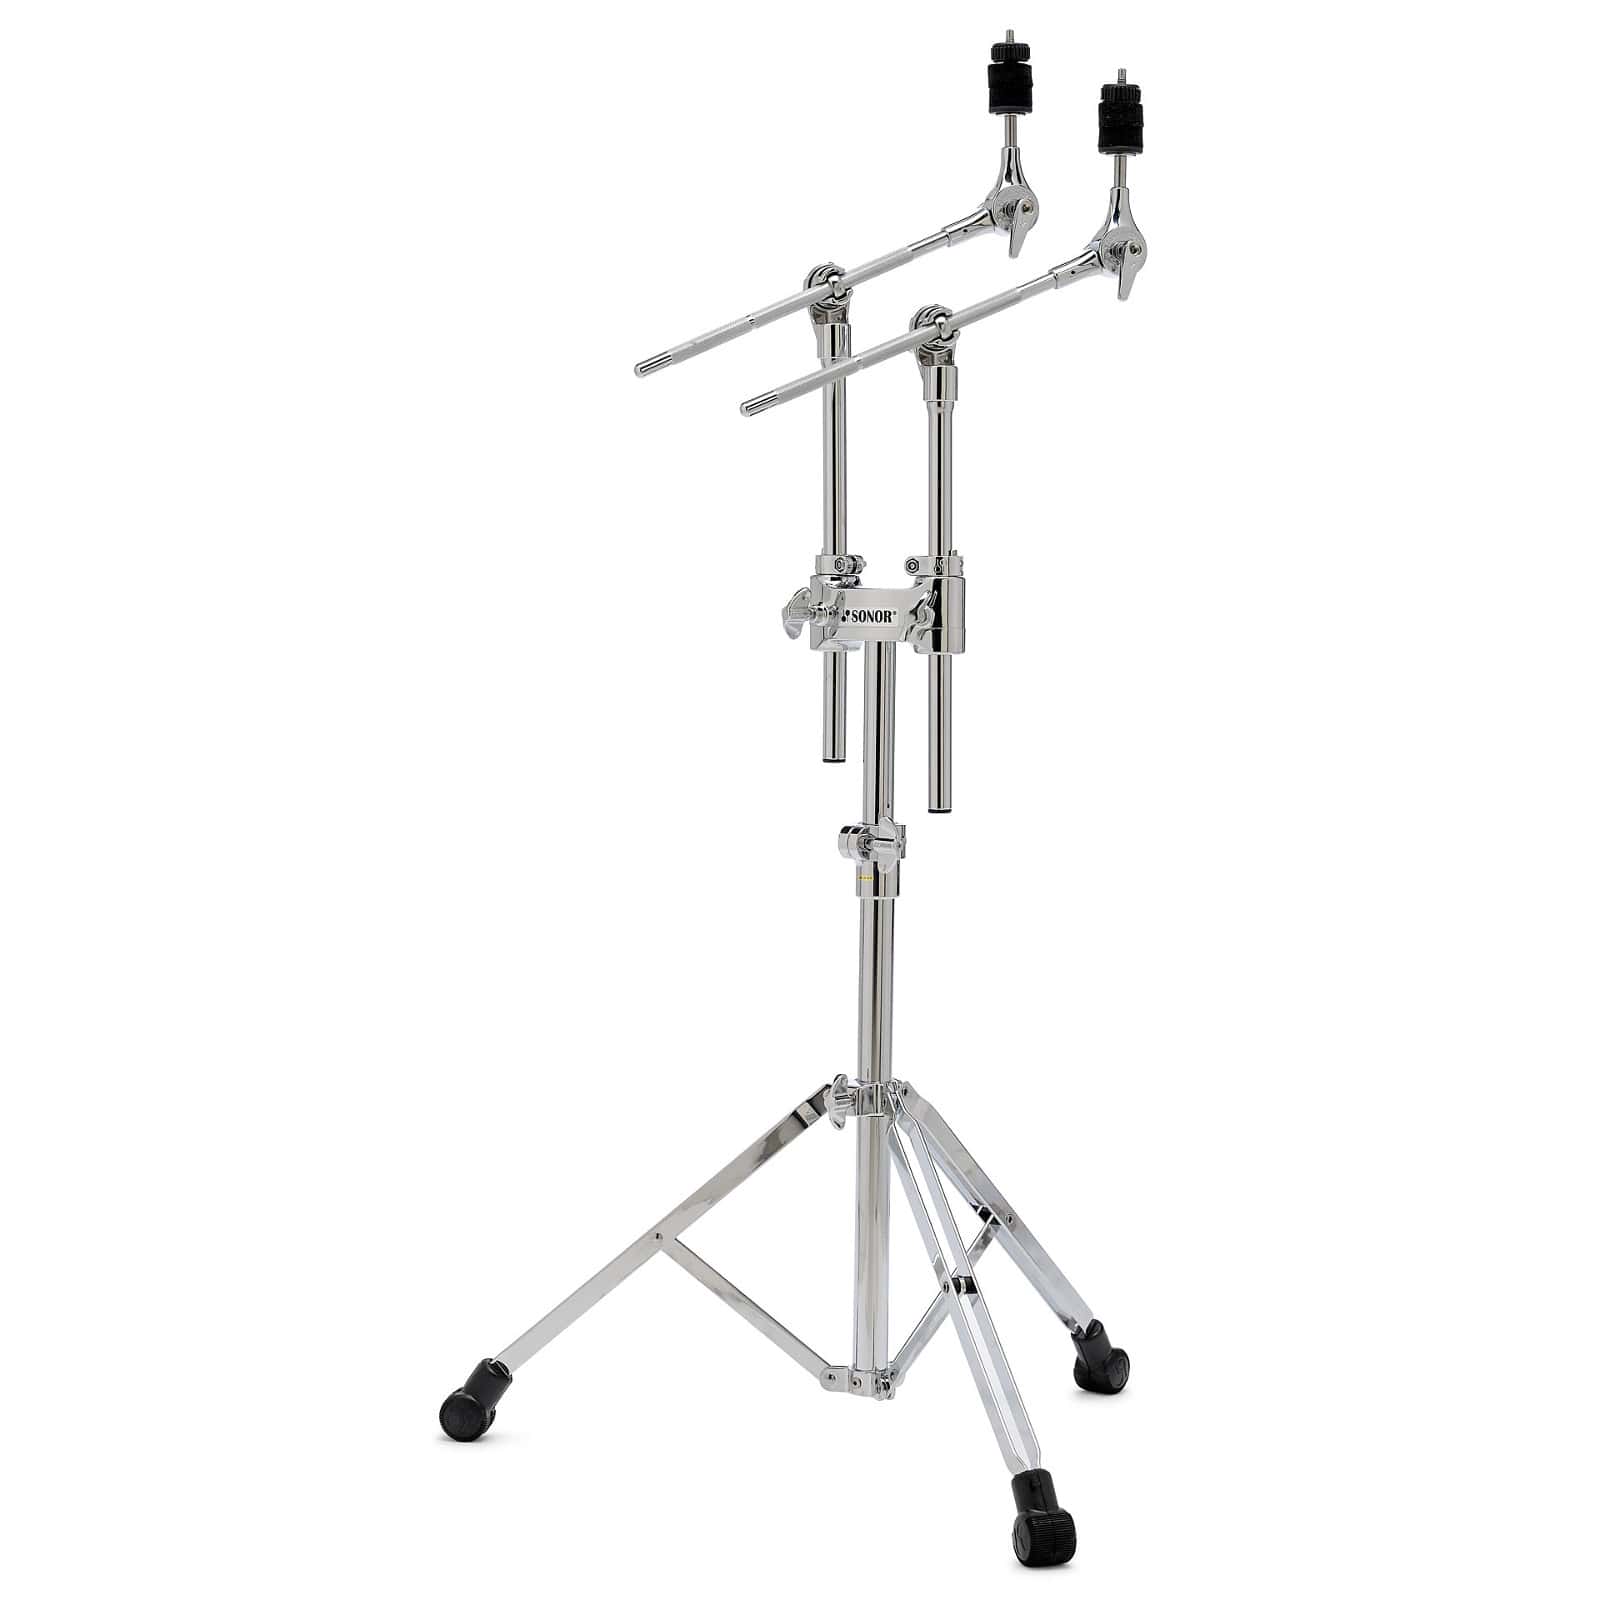 SONOR DCS 4000 DOUBLE STAND DE CYMBALE